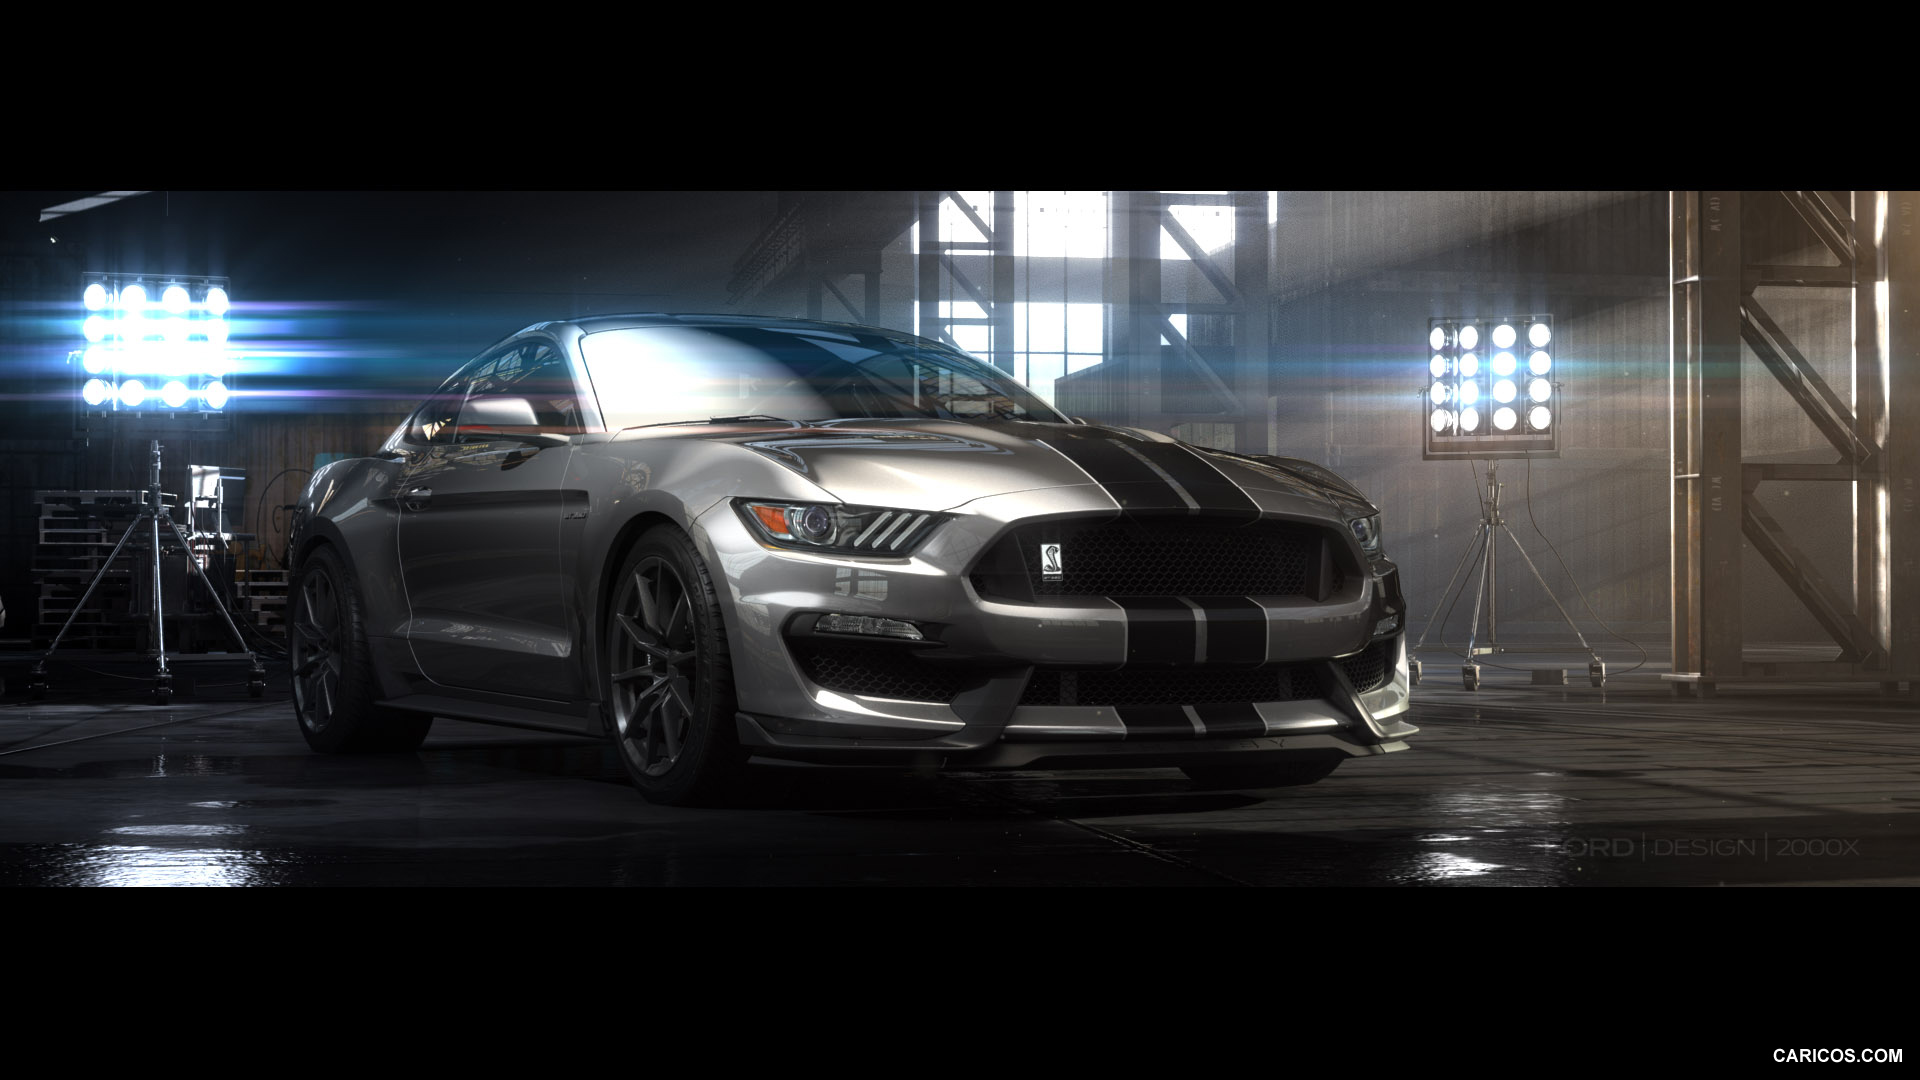 29 Ford Mustang Shelby Gt350 Wallpapers On Wallpapersafari